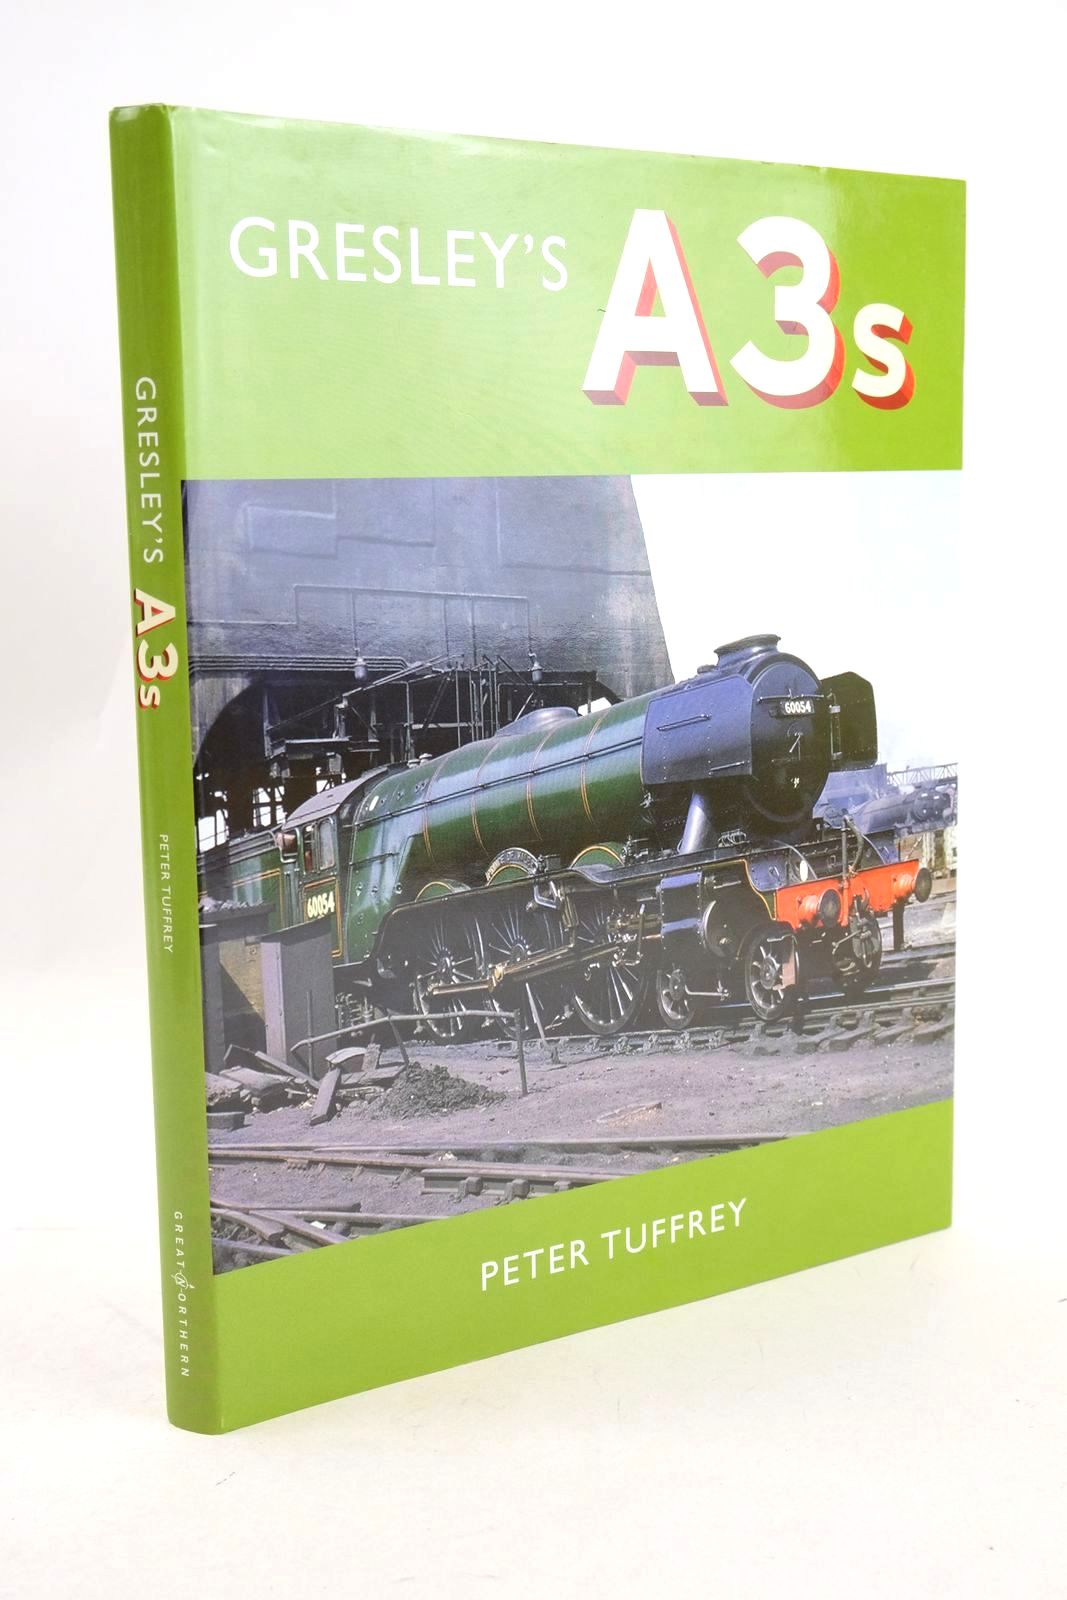 Photo of GRESLEY'S A3S written by Tuffrey, Peter published by Great Northern Books (STOCK CODE: 1327015)  for sale by Stella & Rose's Books